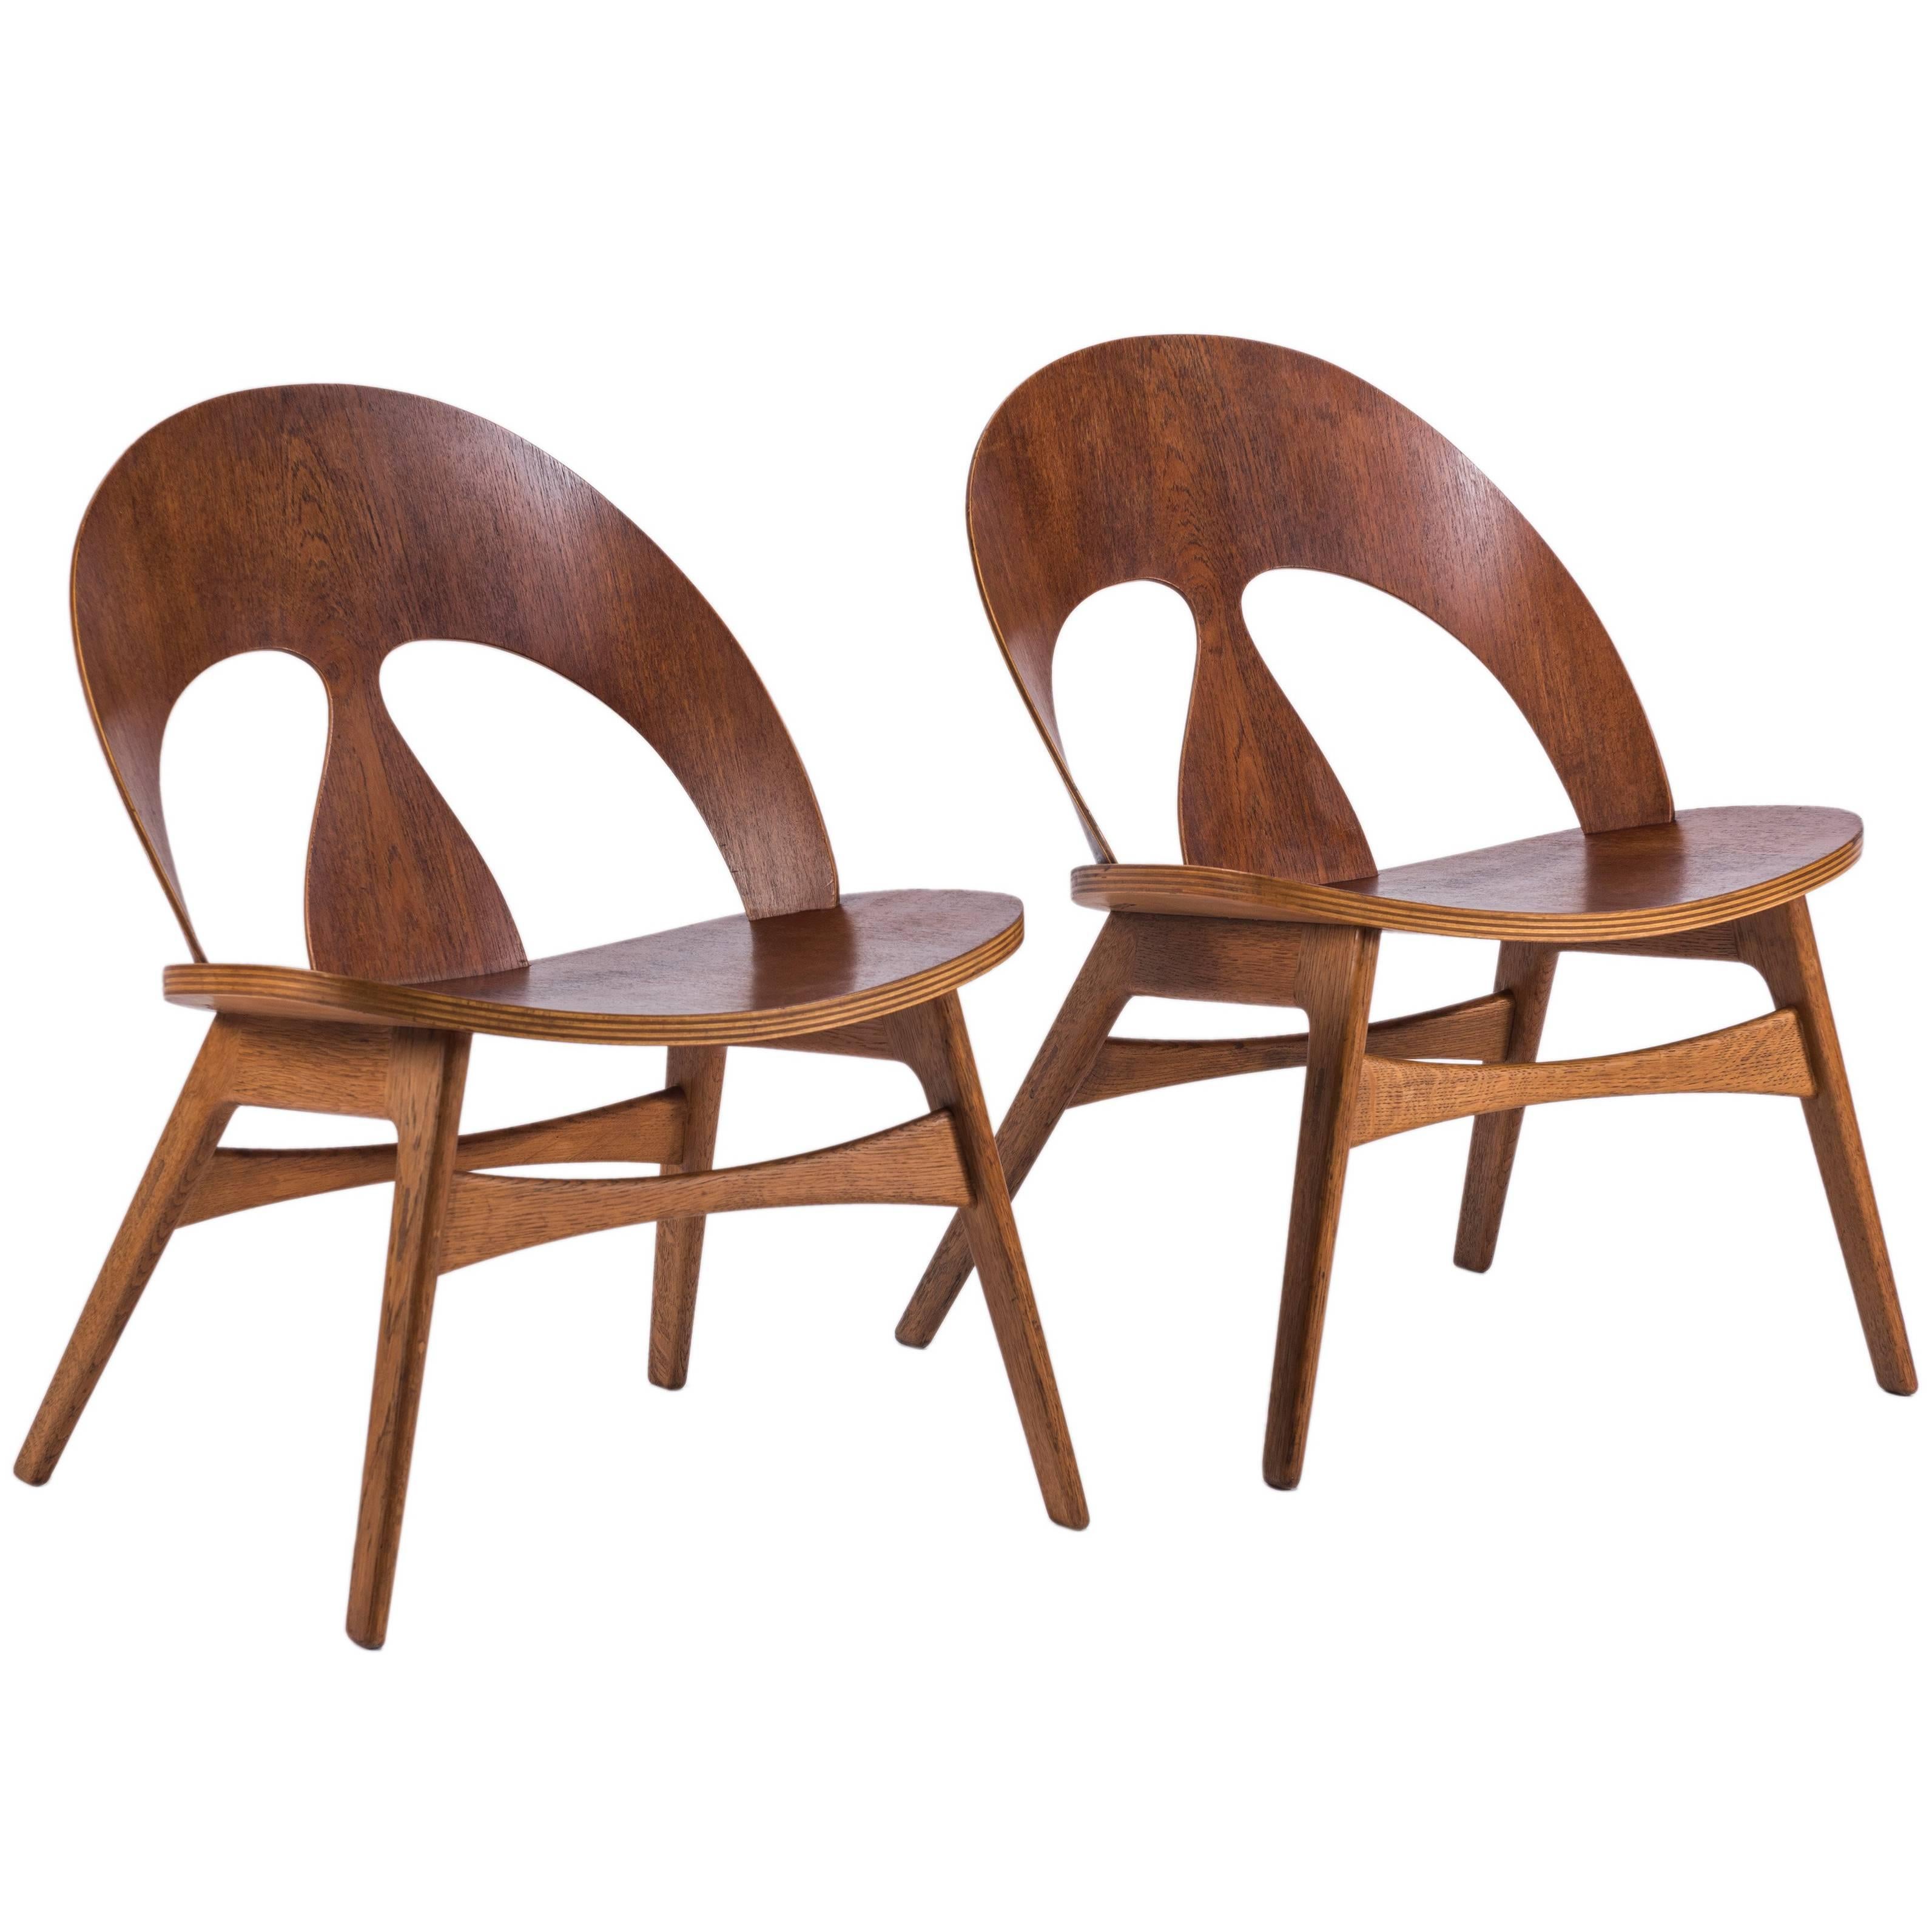 Pair of Early Børge Mogensen Plywood Lounge Chairs for Erhard Rasmussen